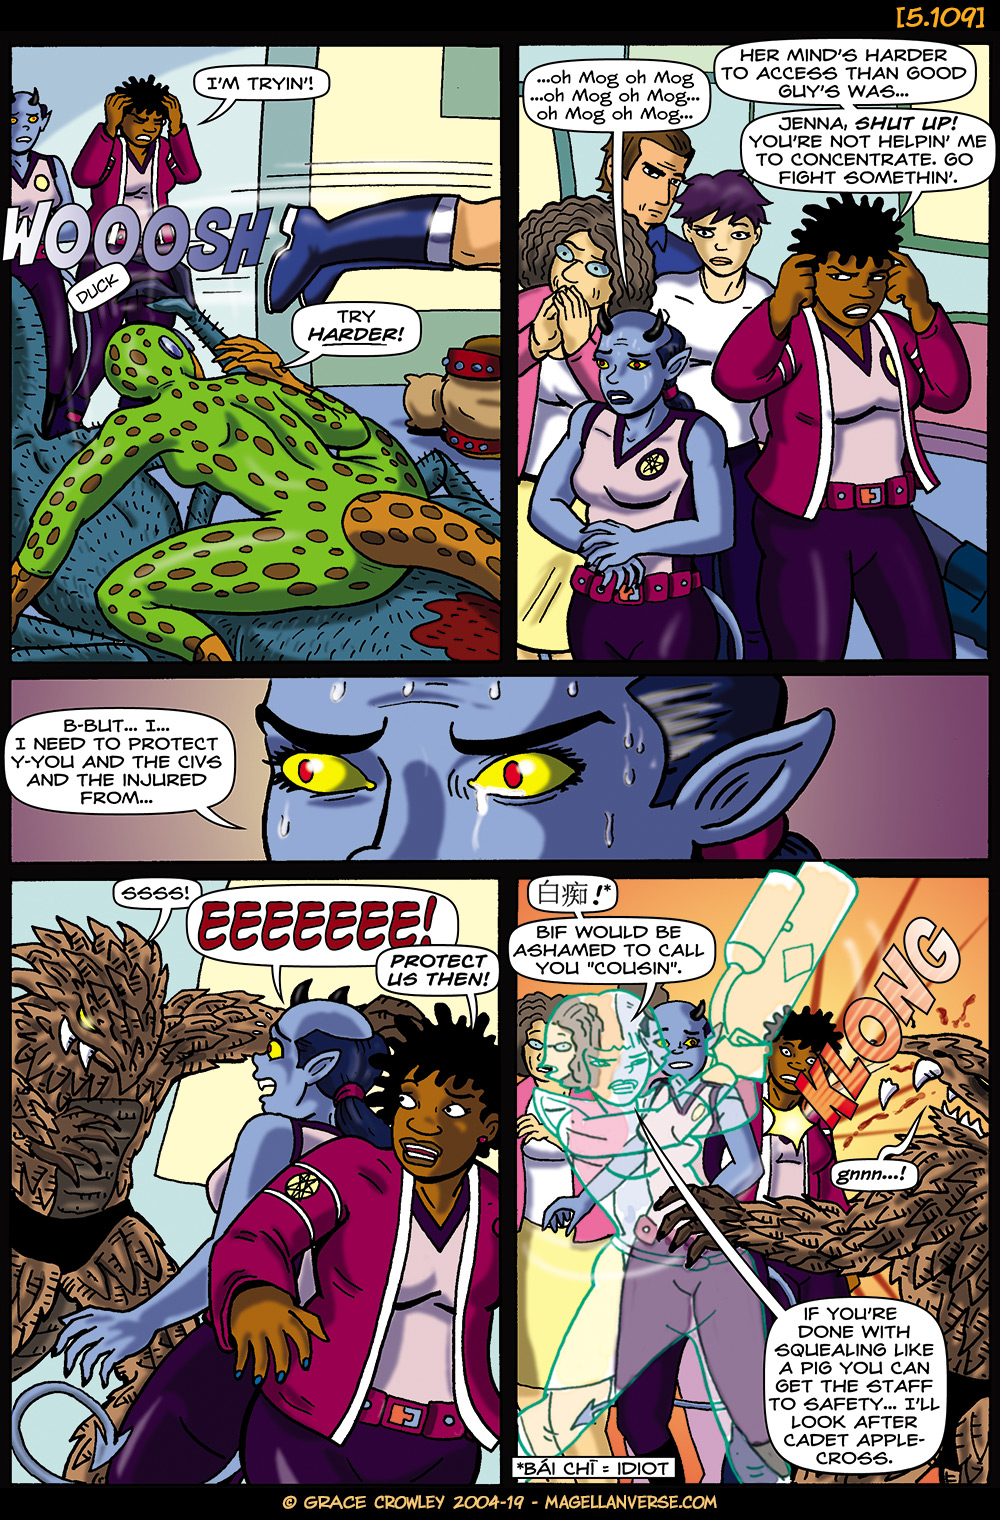 Page 5.109